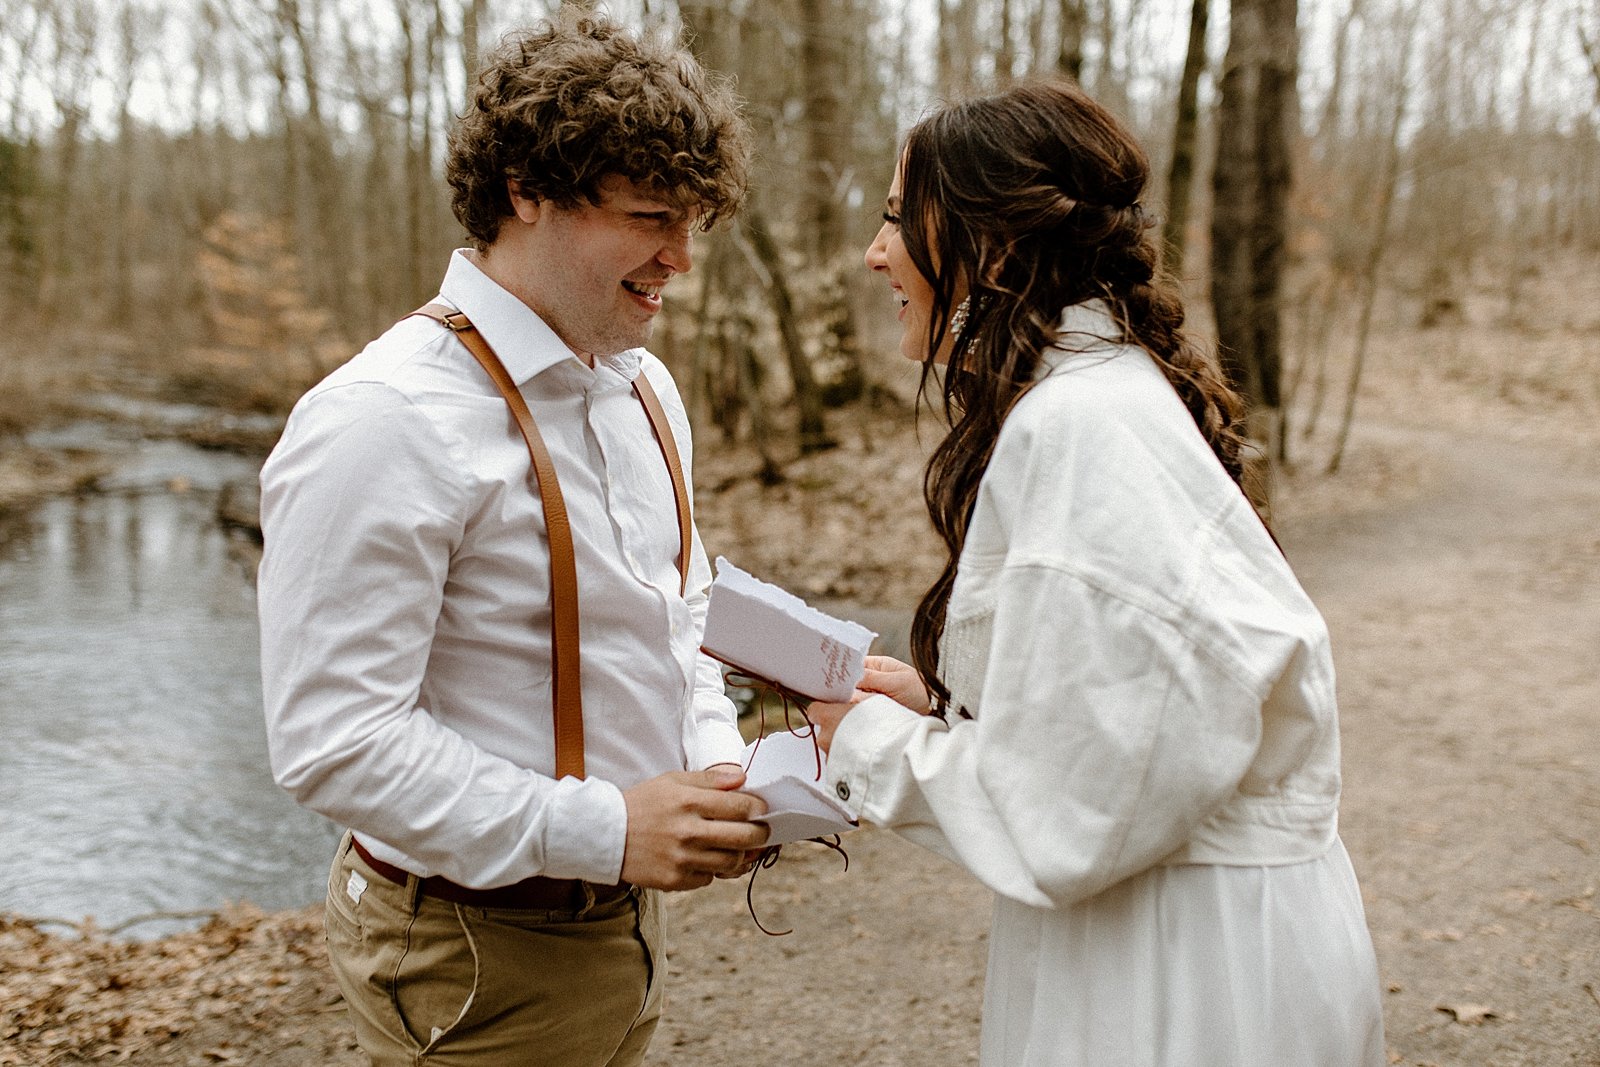 Intimate Weddings vs. Elopements: What's the difference? — Will